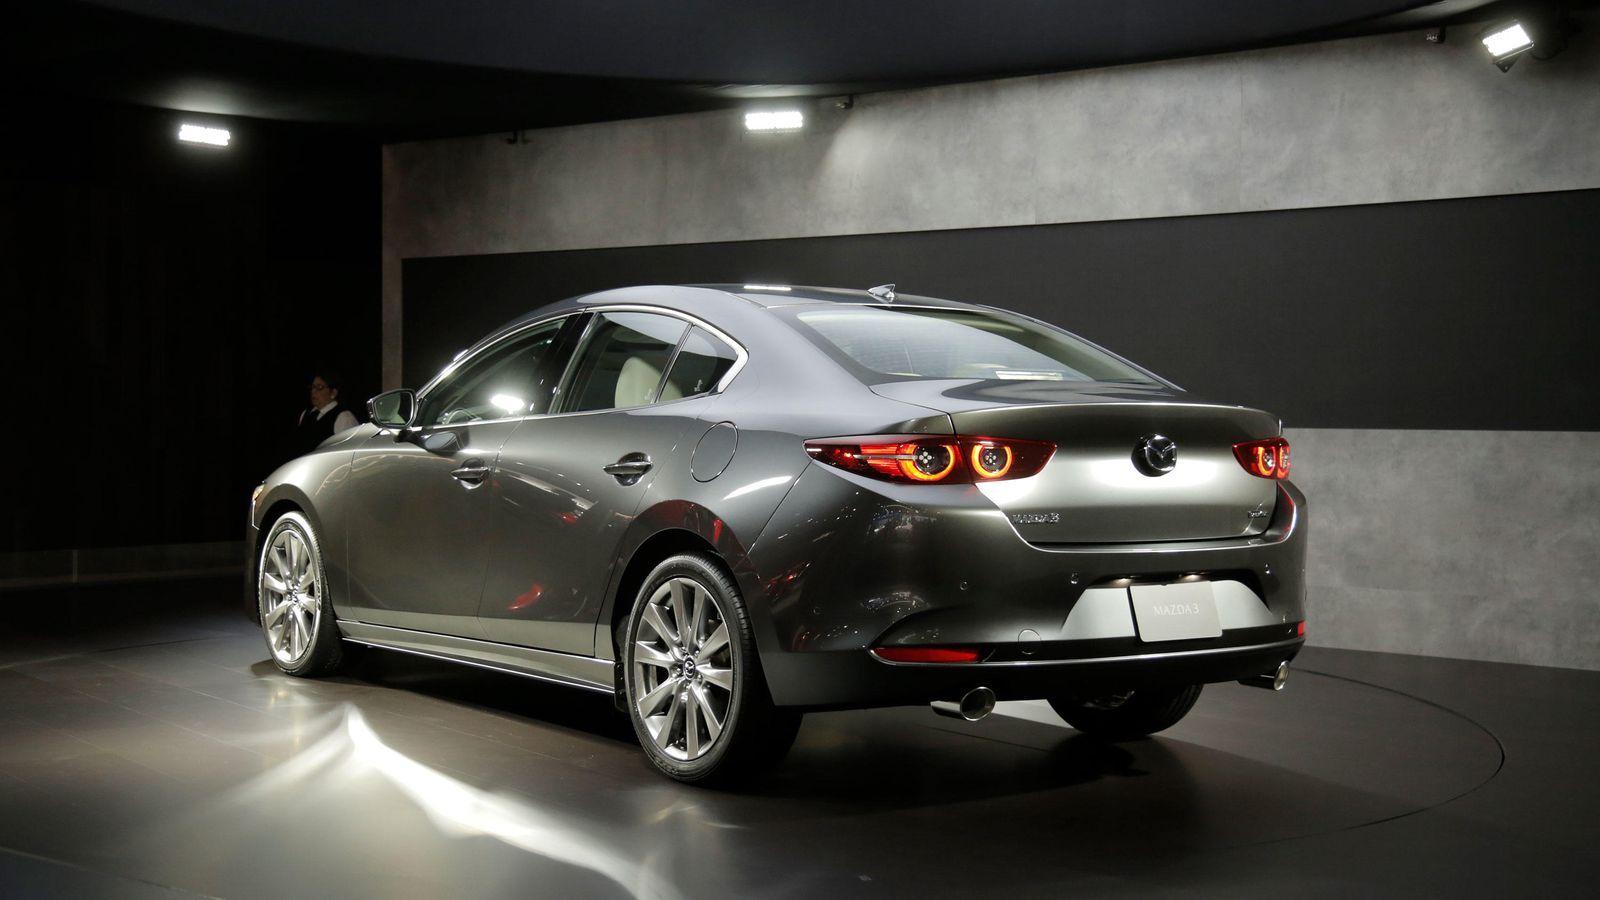 The Best Cuando Sale El Mazda 3 2019 InteriorCar And Vehicle Review